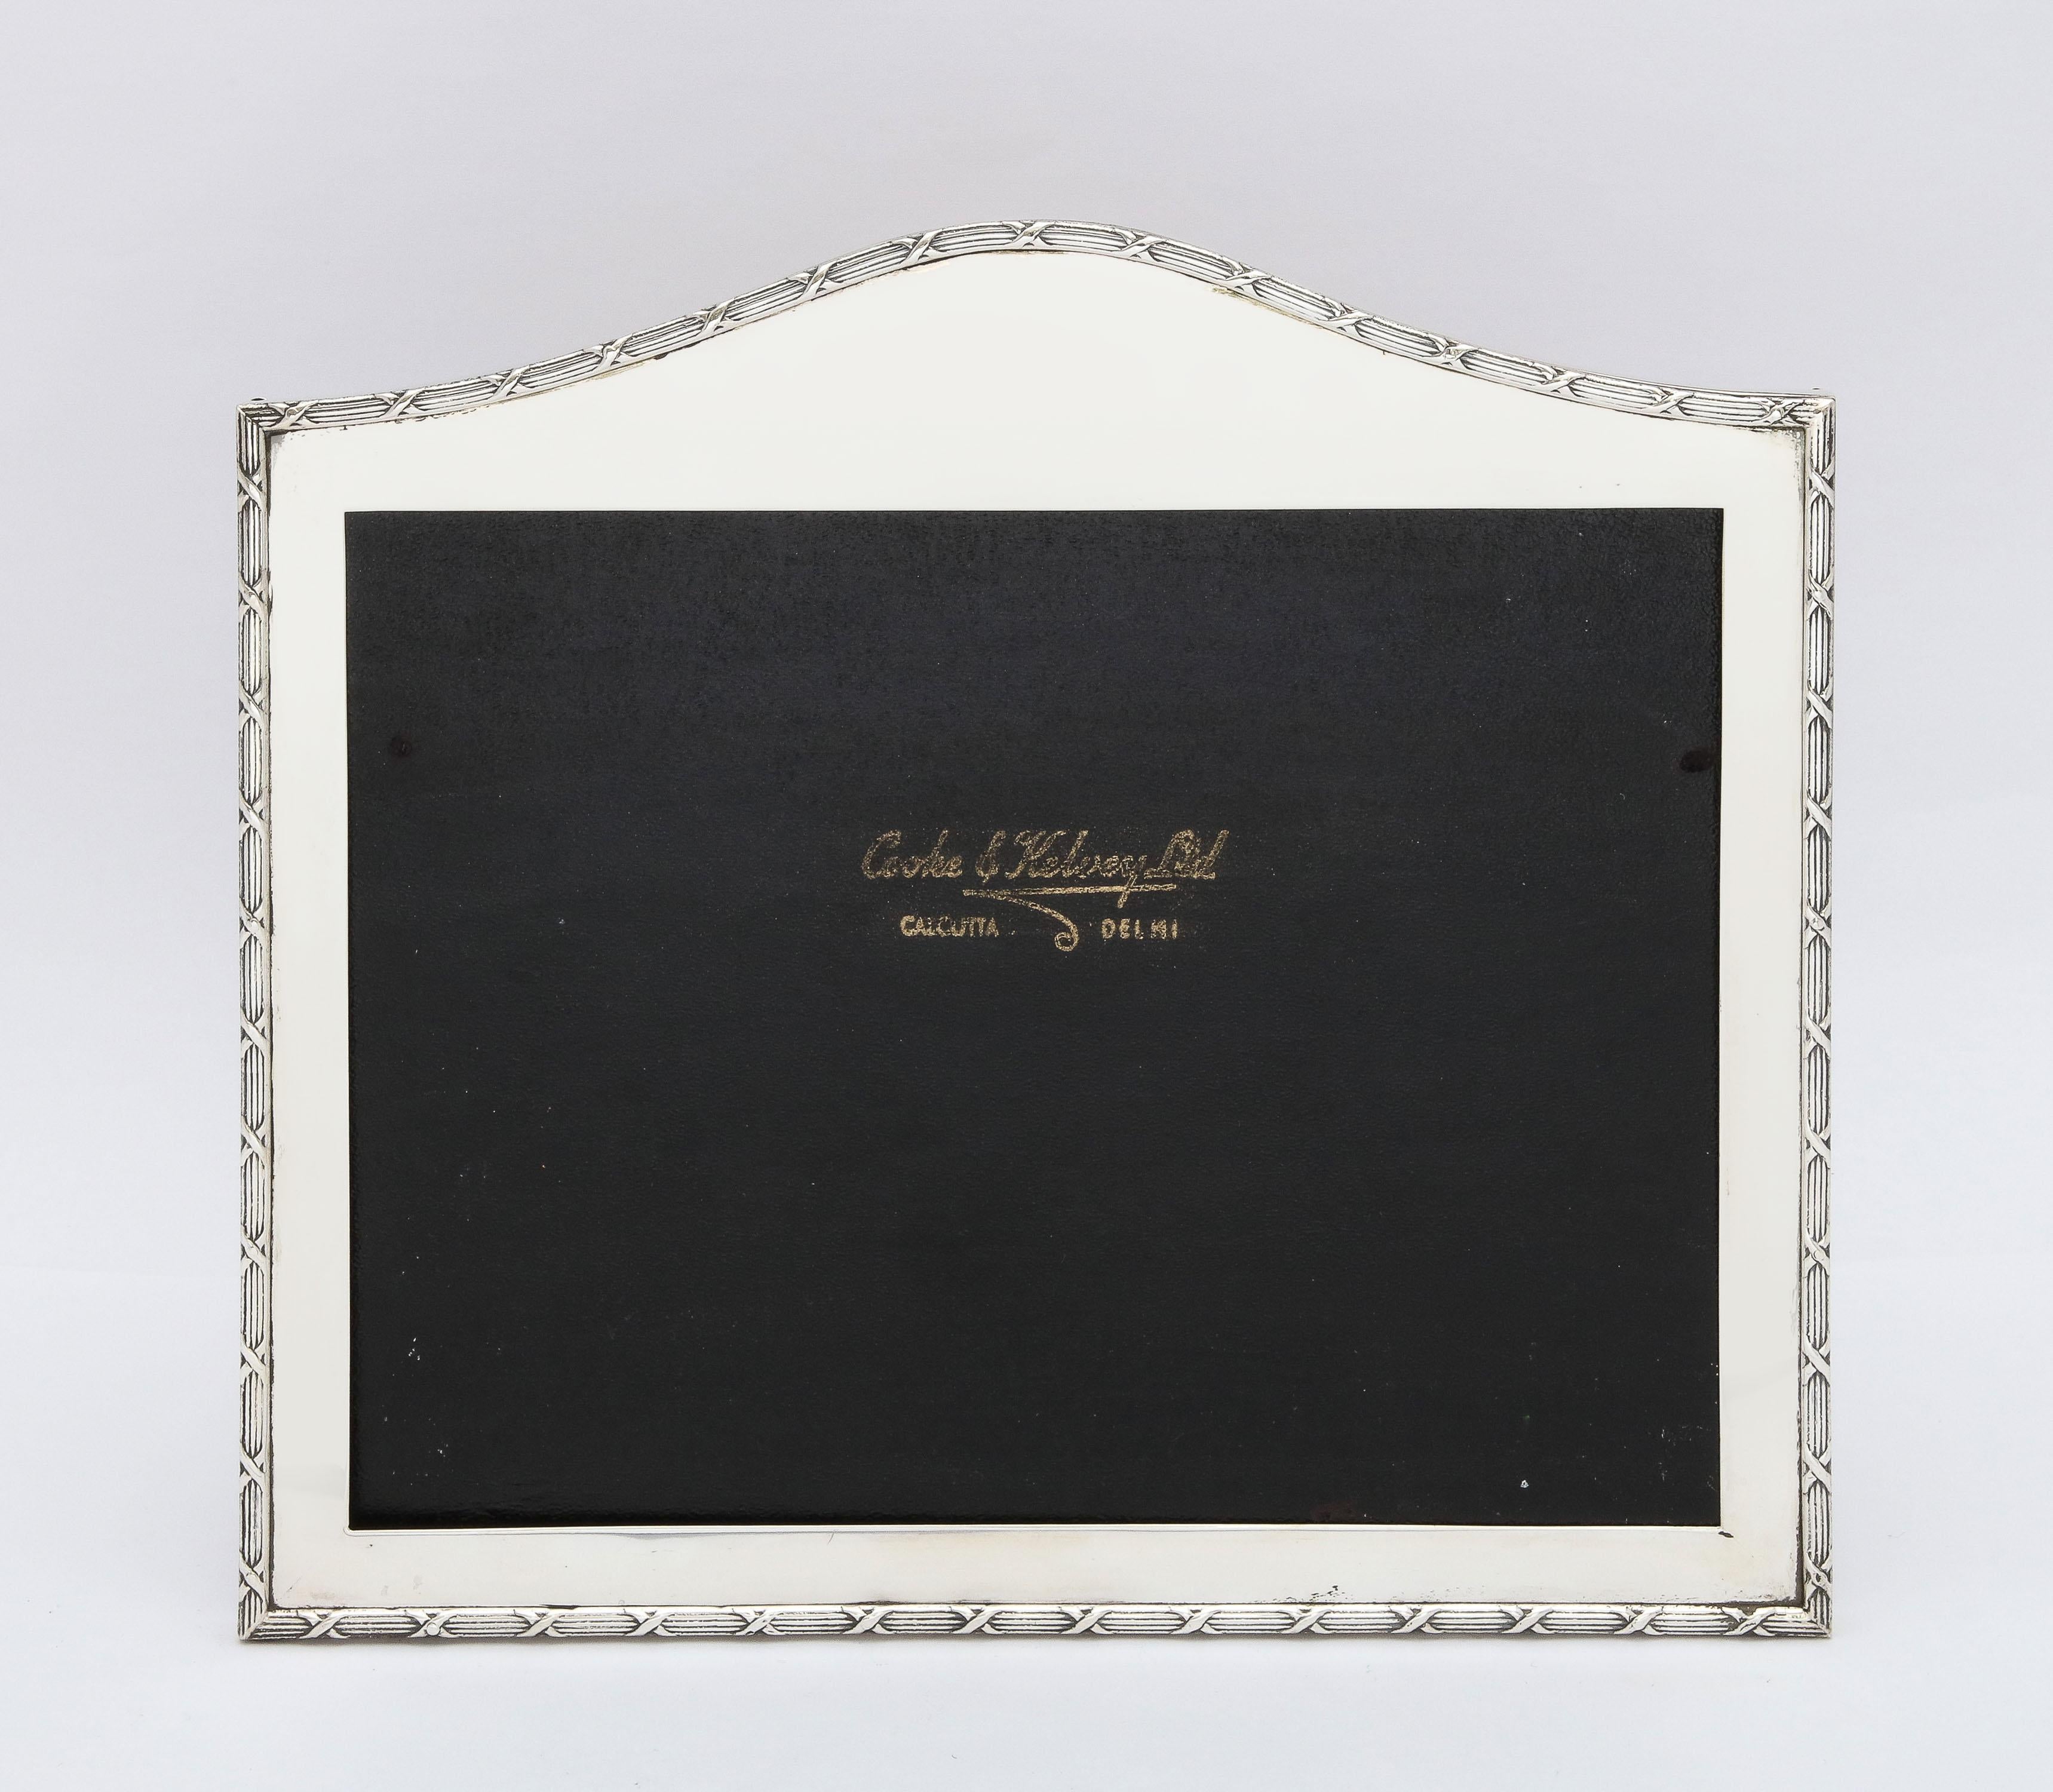 Large, Edwardian Period, Anglo-Indian, sterling silver, Hump-topped picture frame with wood back, Calcutta/Delhi, India, 1910, Cooke and Kelvy - makers. Ribbon and reed borders. Measures 8 1/2 inches high (at highest point) x 9 1/4 inches wide (at